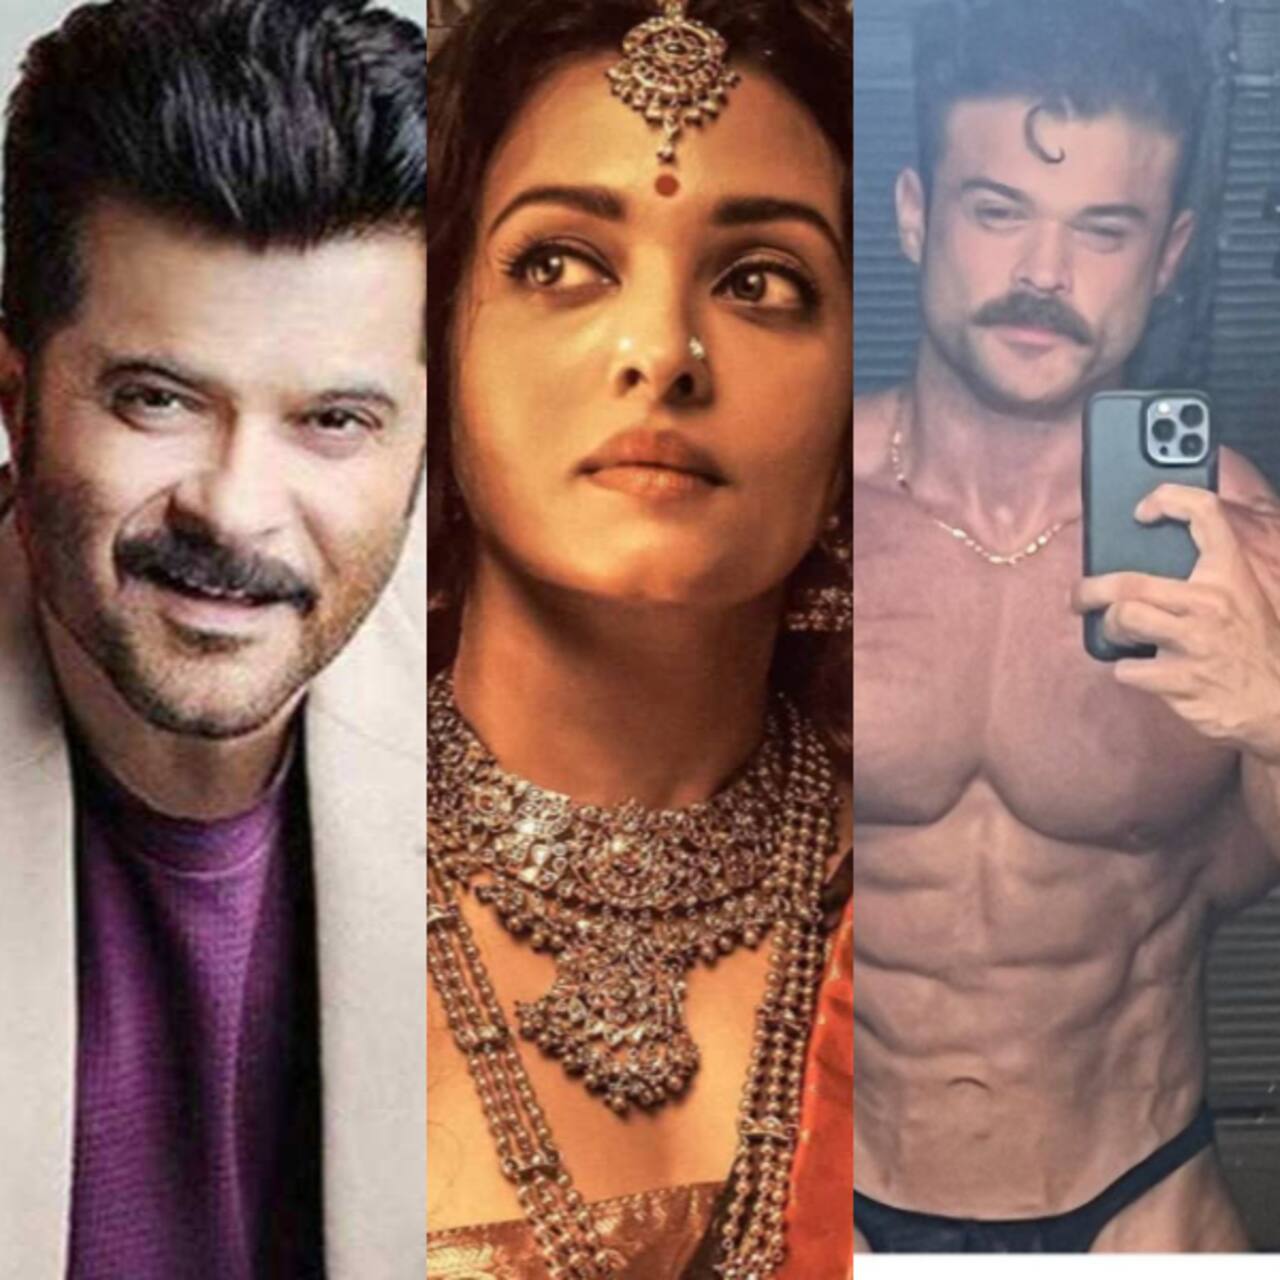 Trending Entertainment News Today: Anil Kapoor's doppelganger is Bollywood ready, Aishwarya Rai Bachchan not the first choice for Ponniyin Selvan and more